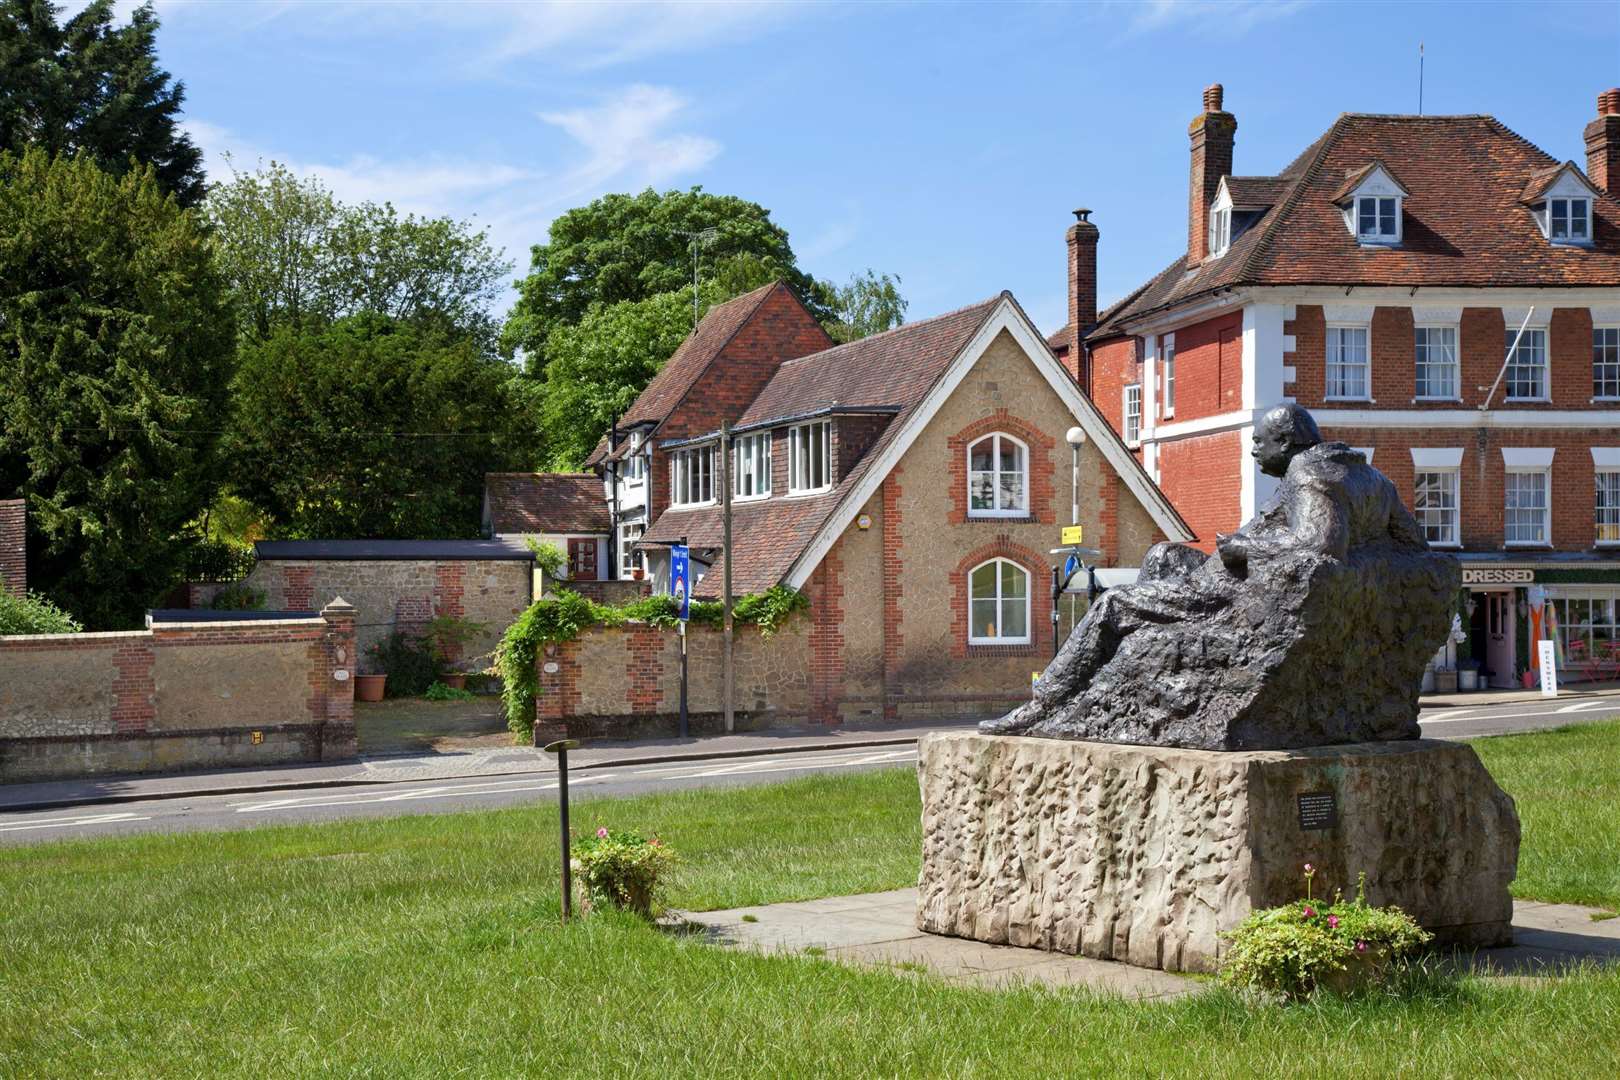 Churchill's statue in Westerham with the Owl House behind